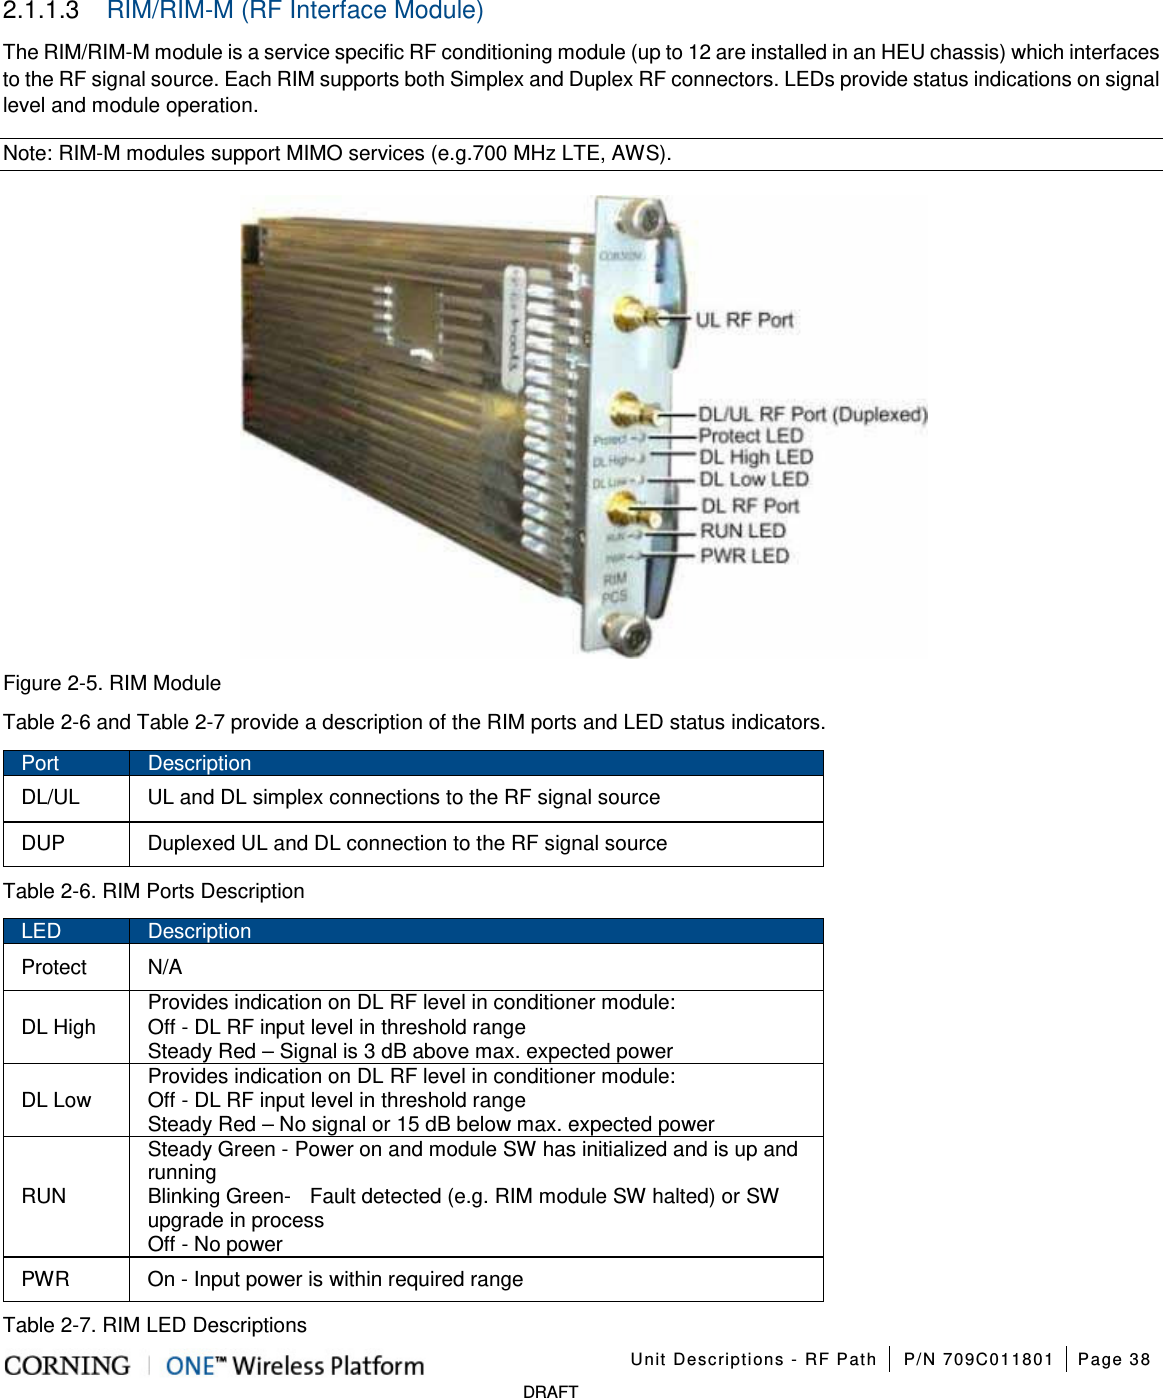    Unit Descriptions - RF Path P/N 709C011801 Page 38   DRAFT 2.1.1.3  RIM/RIM-M (RF Interface Module) The RIM/RIM-M module is a service specific RF conditioning module (up to 12 are installed in an HEU chassis) which interfaces to the RF signal source. Each RIM supports both Simplex and Duplex RF connectors. LEDs provide status indications on signal level and module operation. Note: RIM-M modules support MIMO services (e.g.700 MHz LTE, AWS).  Figure  2-5. RIM Module Table  2-6 and Table  2-7 provide a description of the RIM ports and LED status indicators. Port Description DL/UL UL and DL simplex connections to the RF signal source DUP Duplexed UL and DL connection to the RF signal source Table  2-6. RIM Ports Description LED Description Protect N/A DL High Provides indication on DL RF level in conditioner module: Off - DL RF input level in threshold range Steady Red – Signal is 3 dB above max. expected power   DL Low Provides indication on DL RF level in conditioner module: Off - DL RF input level in threshold range Steady Red – No signal or 15 dB below max. expected power RUN Steady Green - Power on and module SW has initialized and is up and running Blinking Green-  Fault detected (e.g. RIM module SW halted) or SW upgrade in process Off - No power PWR On - Input power is within required range Table  2-7. RIM LED Descriptions 